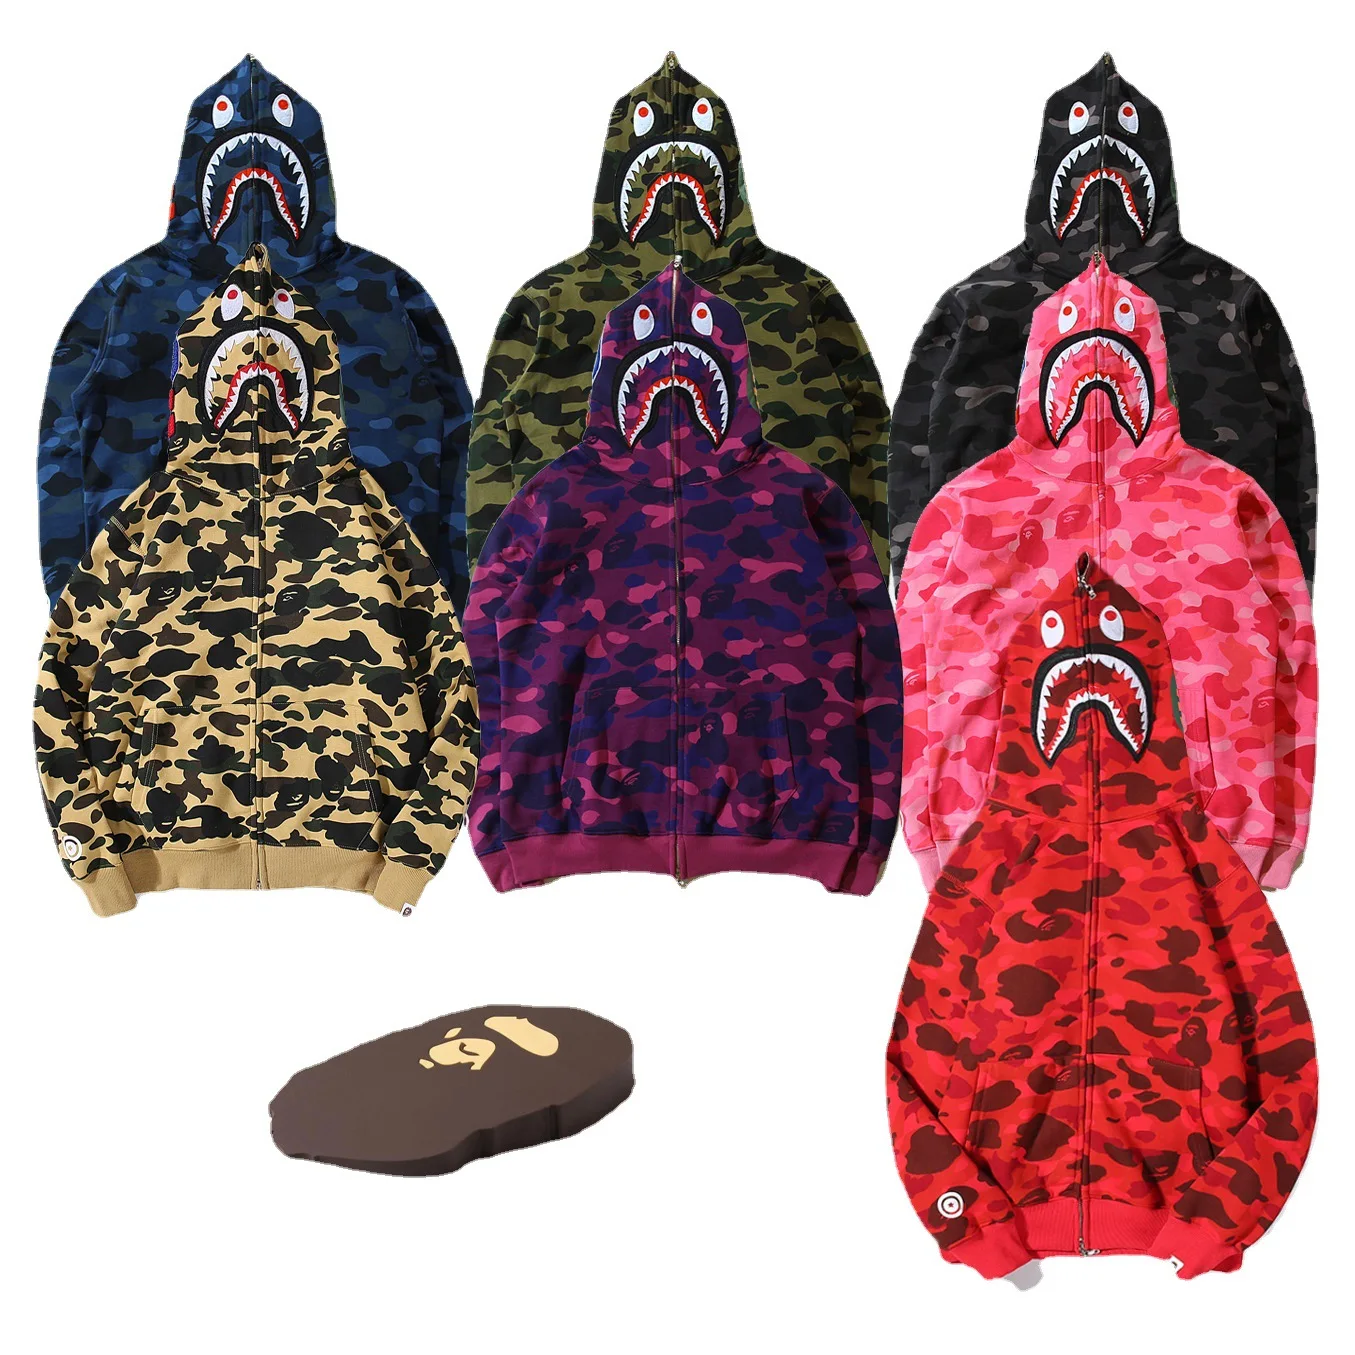 

2021 Fall Winter Men's Shark Camouflage Hoodie Fashion Casual Sports Hooded Jacket BApe Hoodie, Picture shows